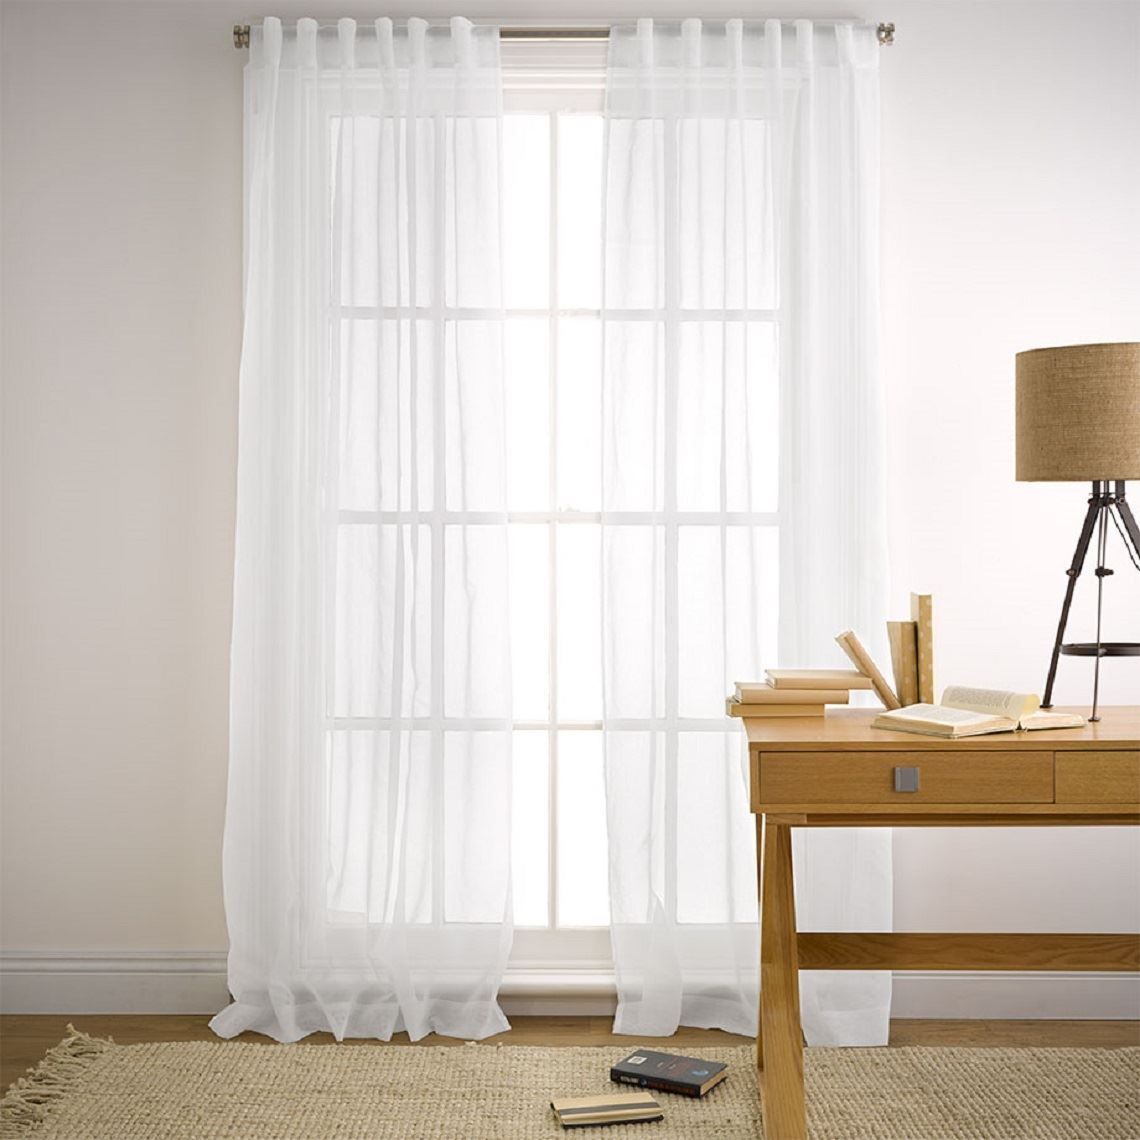 Mineral 180x250cm Sheer Eyelet Curtain Freedom Furniture And For Sheer Eyelet Curtains (View 3 of 15)